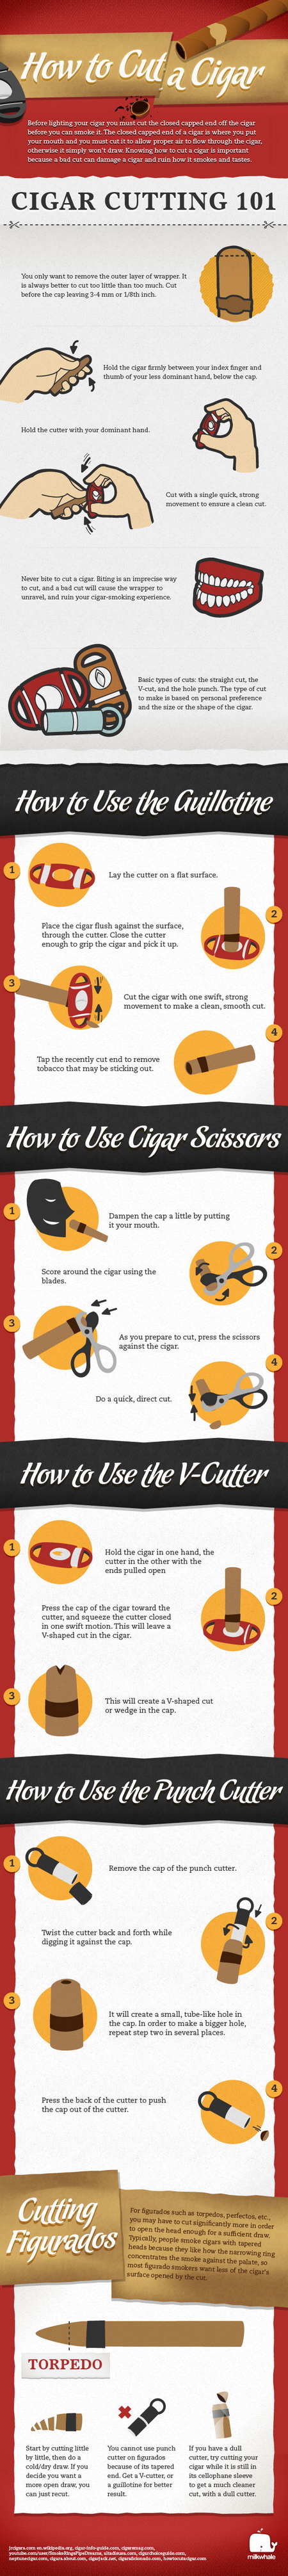 Infographic for Cigar Cutting Infographic: How to Cut a Cigar